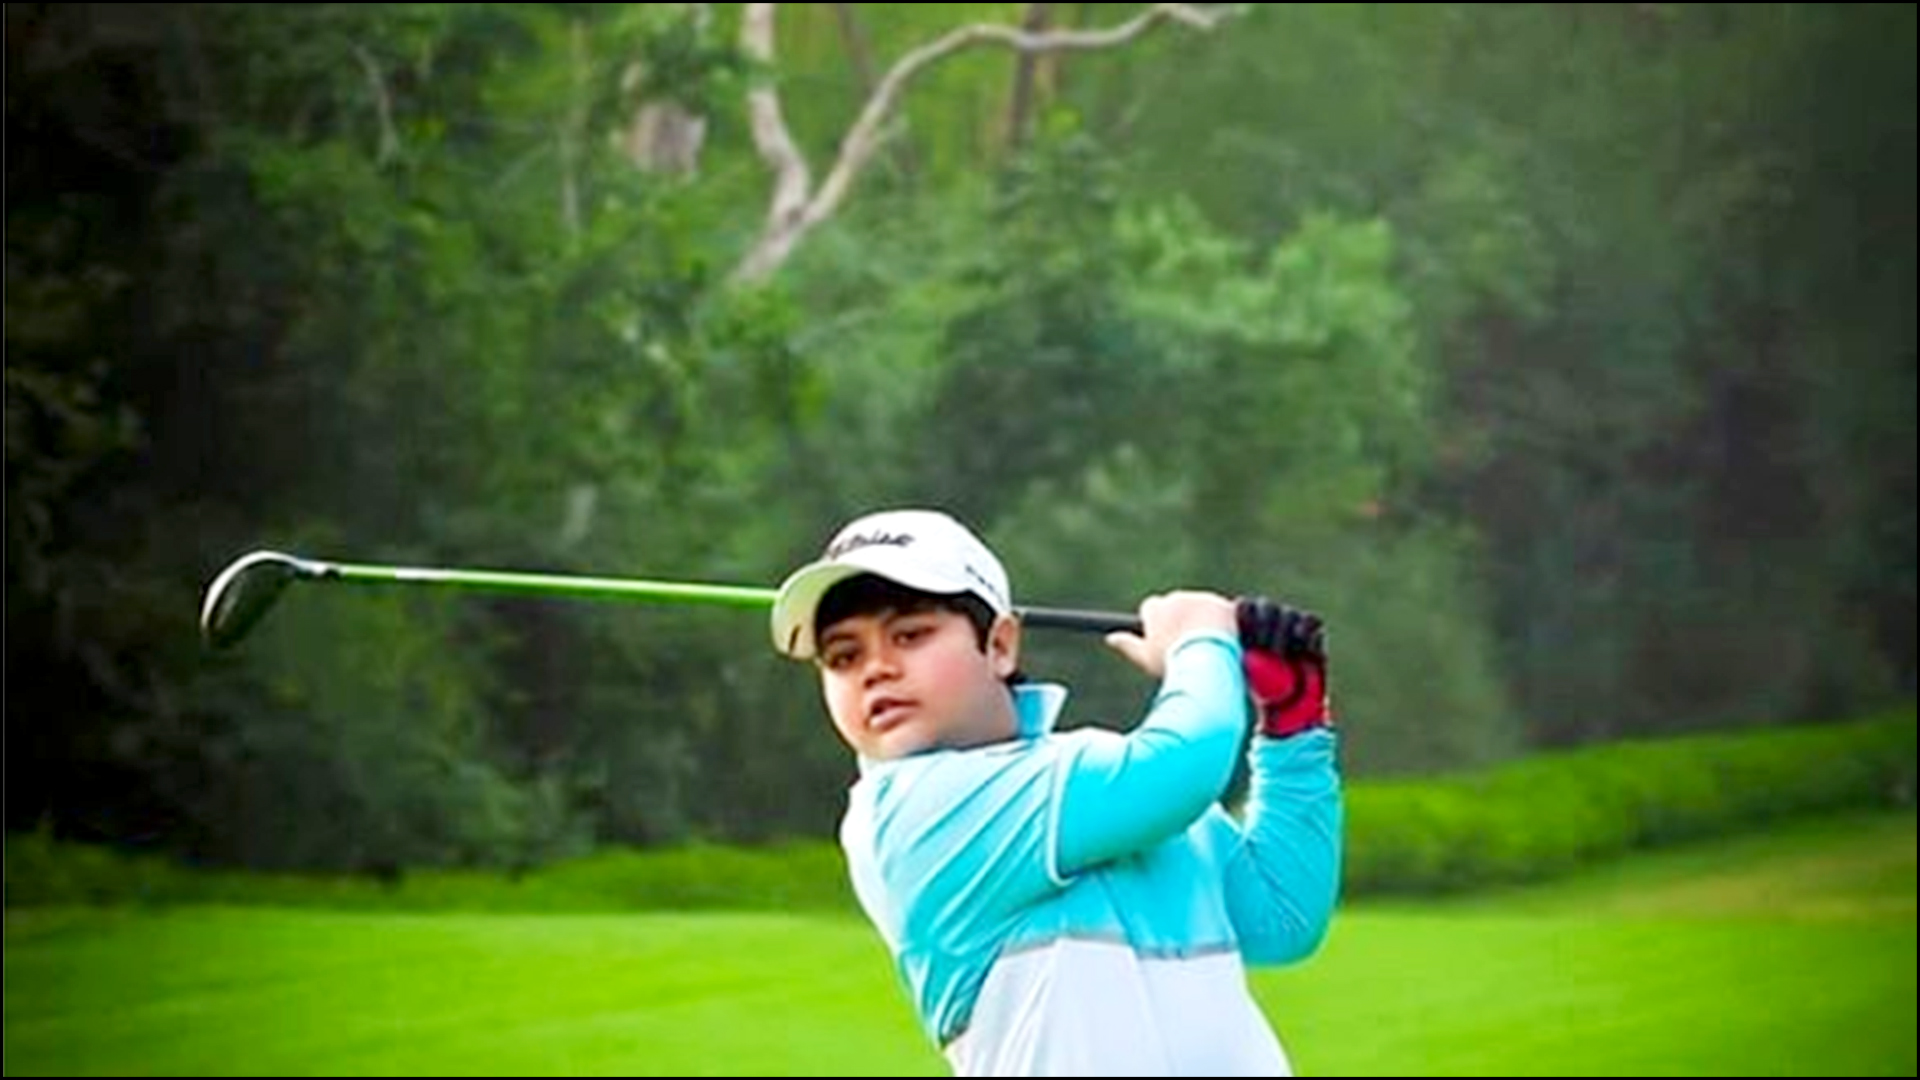 Remarkable support from Parents & School makes Chaitanya Pandey conquer in Golf